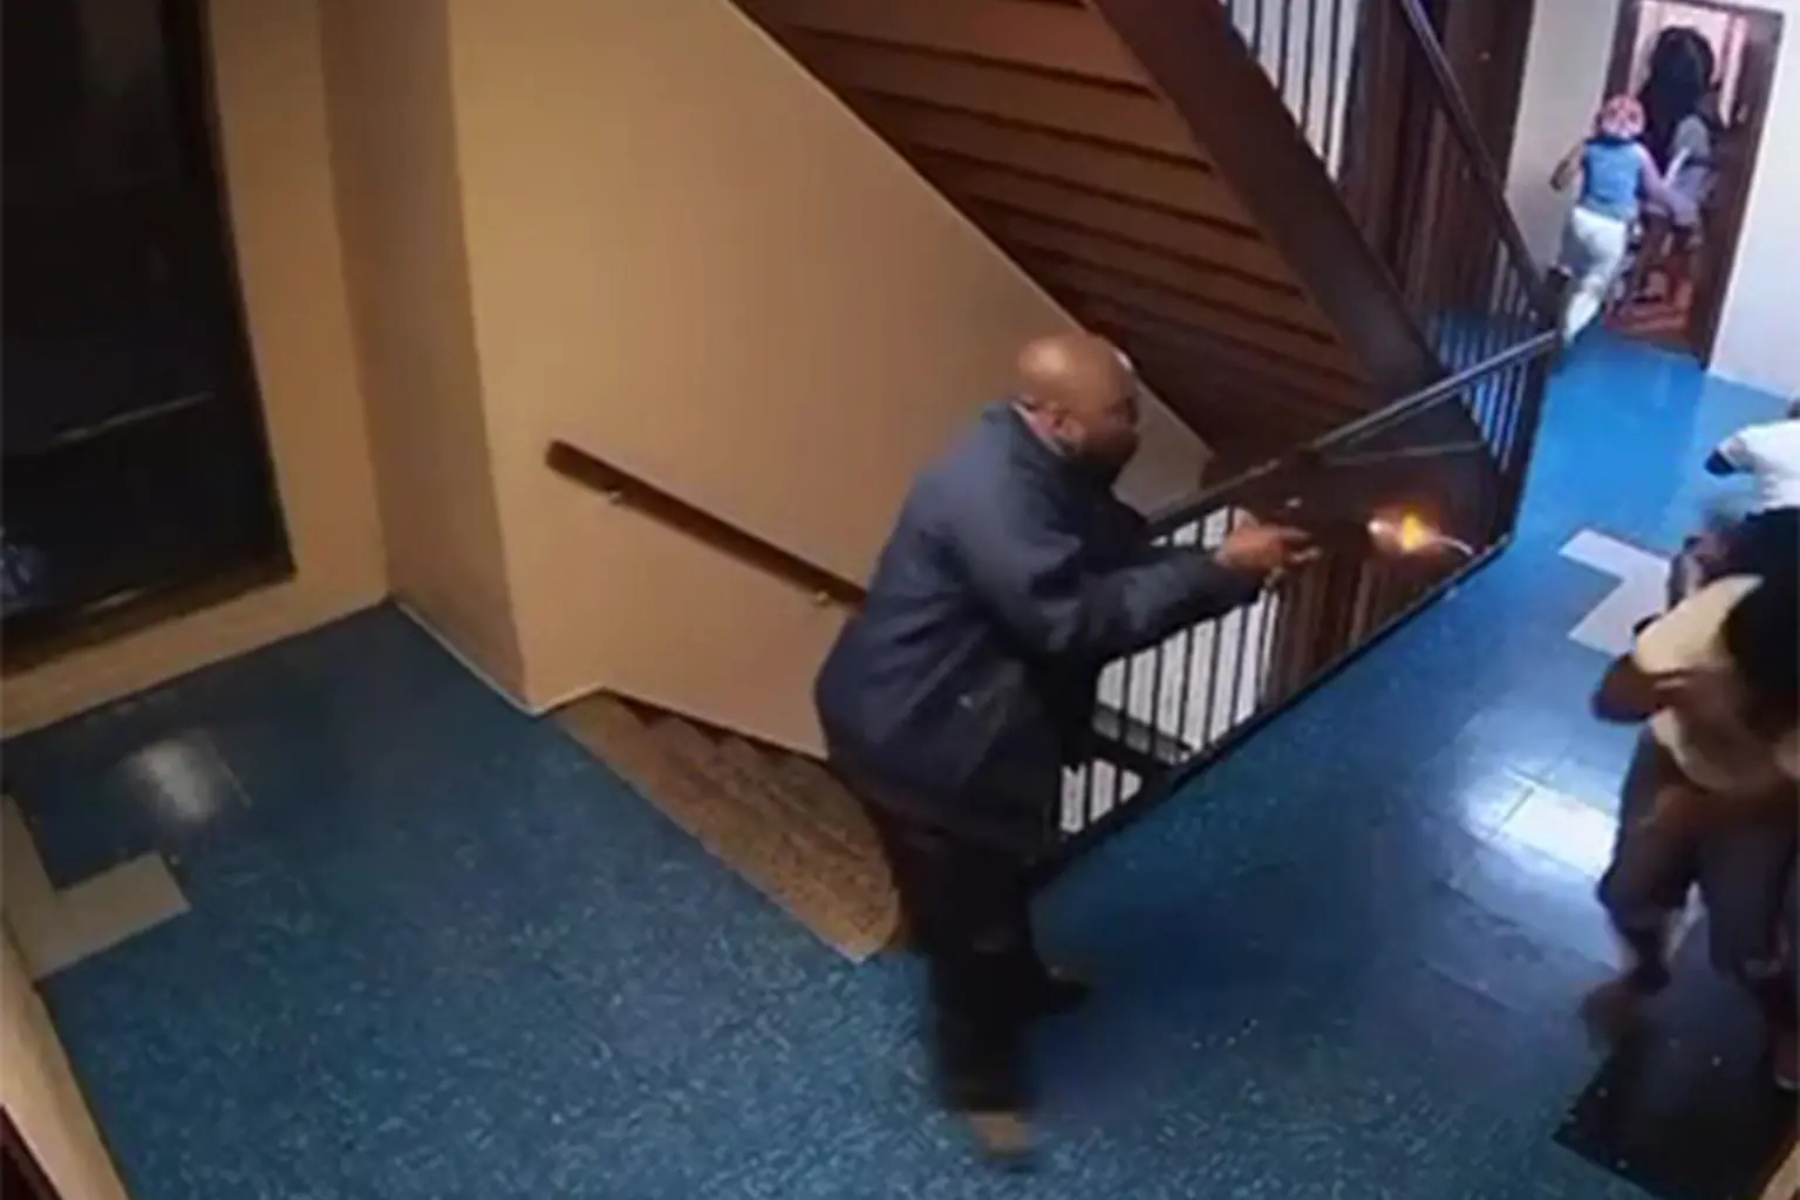 neighbor-shot-and-killed-a-father-and-his-stepson-after-an-argument-over-noise-in-the-hallway-(video)